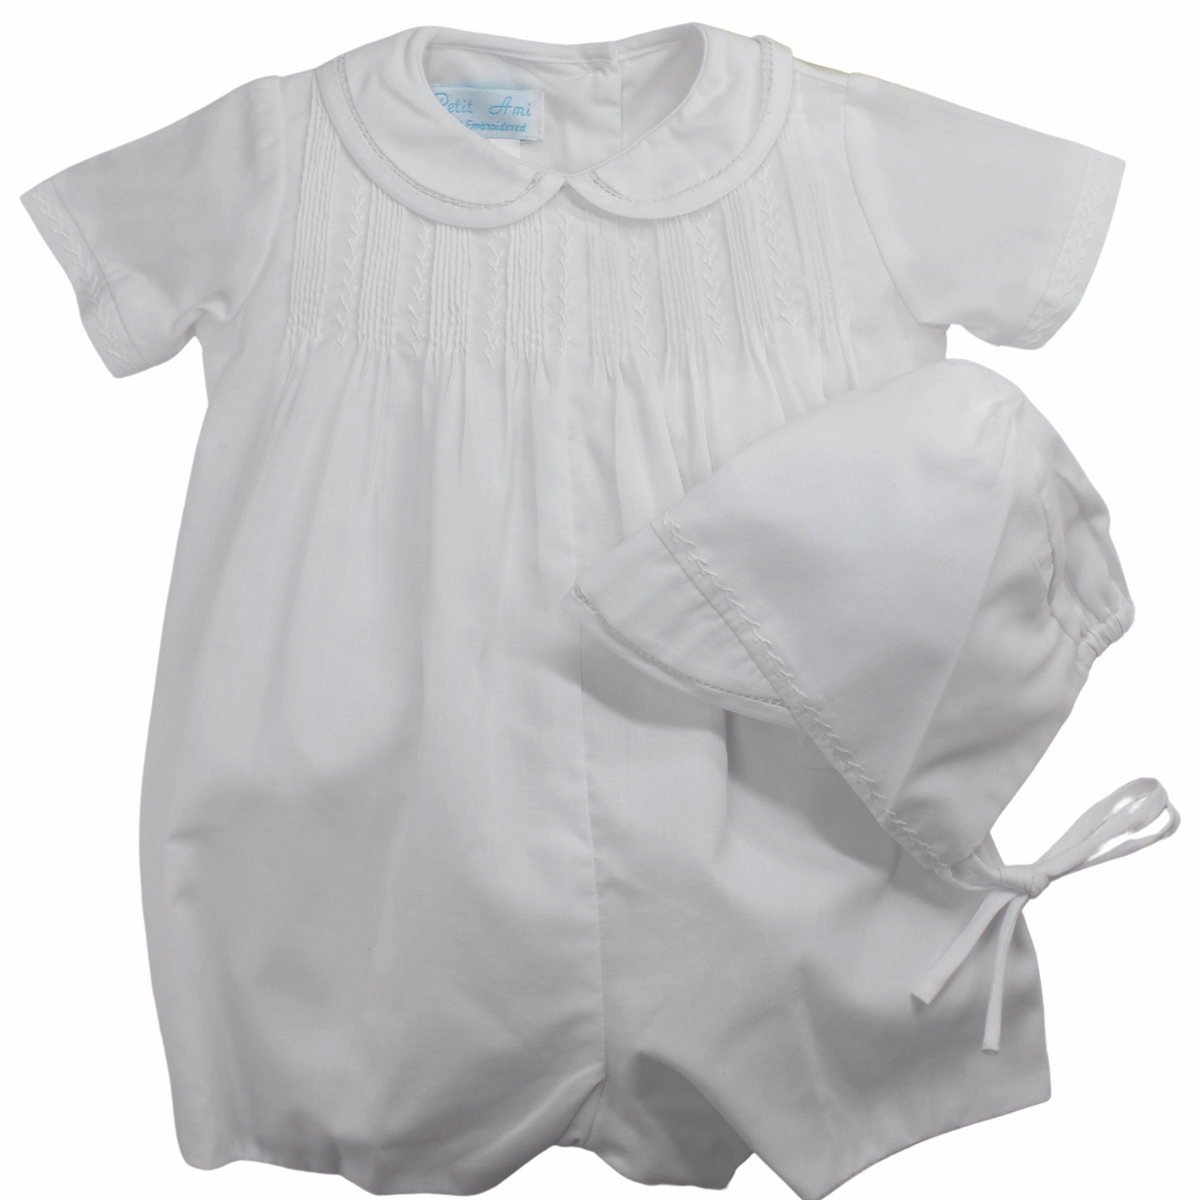 Infant Boys White Christening Romper Outfit with Pintucks